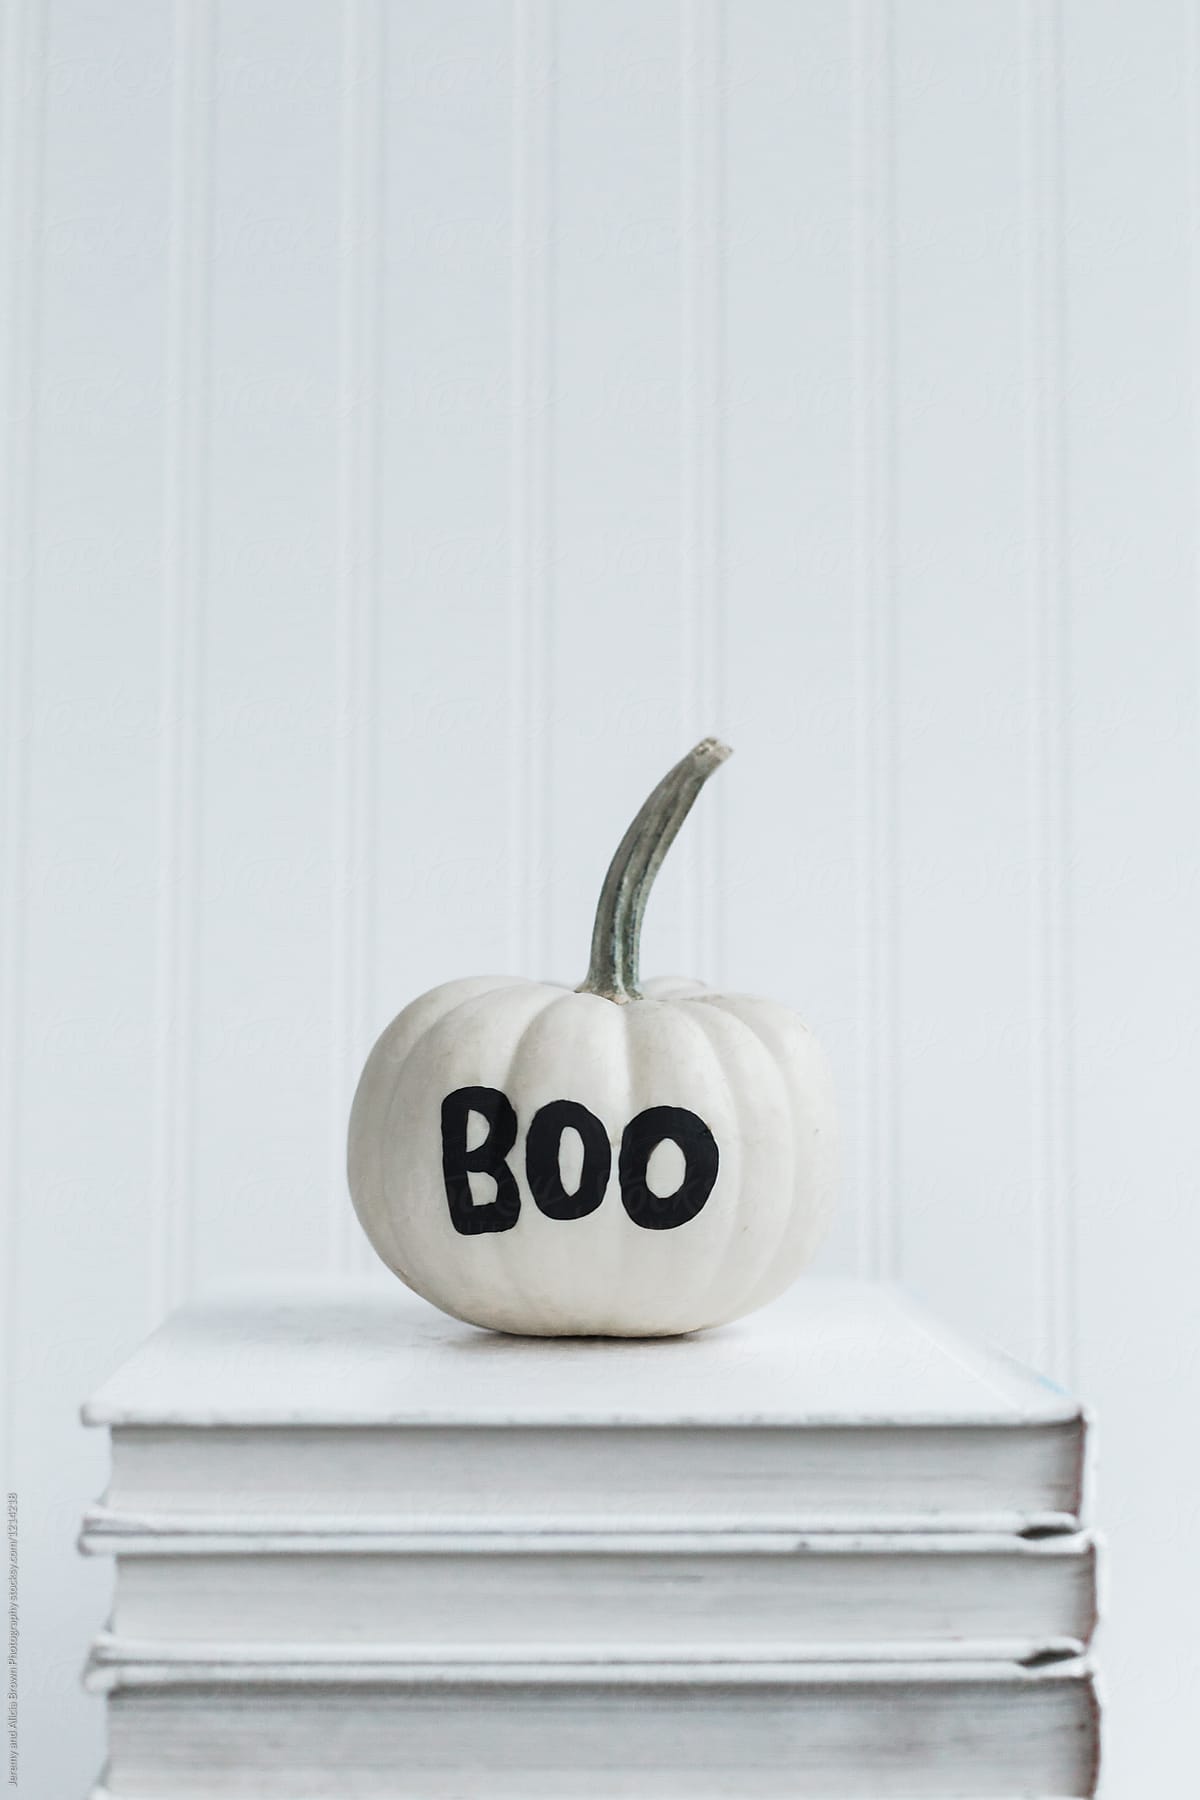 Boo painted on a white pumpkin